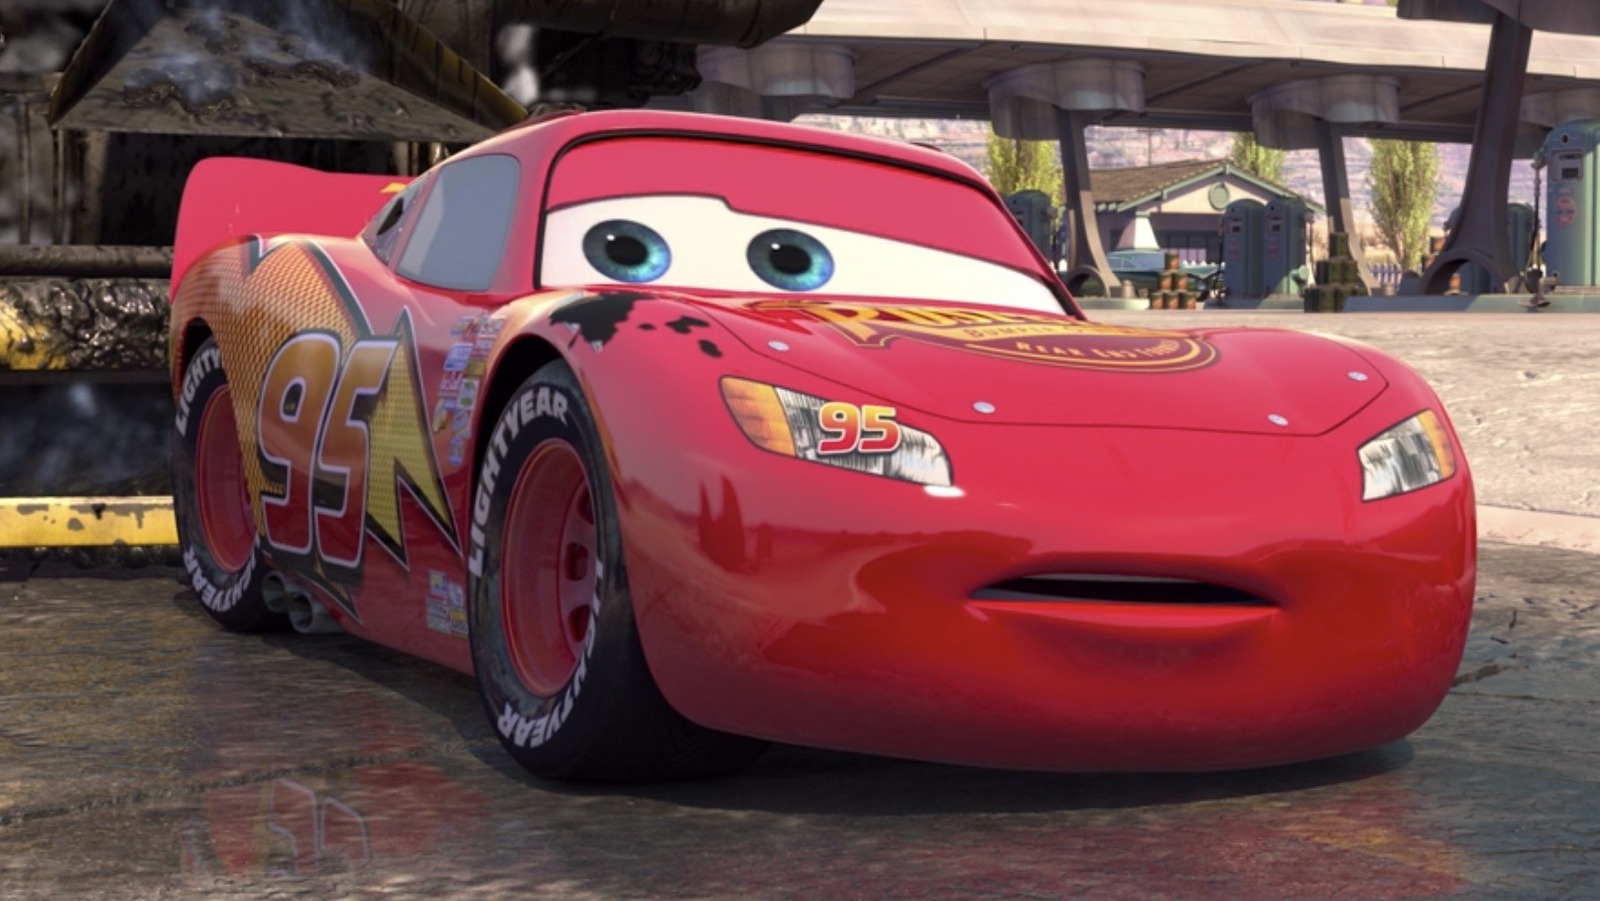 How Old is Lighting McQueen in the 'Cars' Movies?